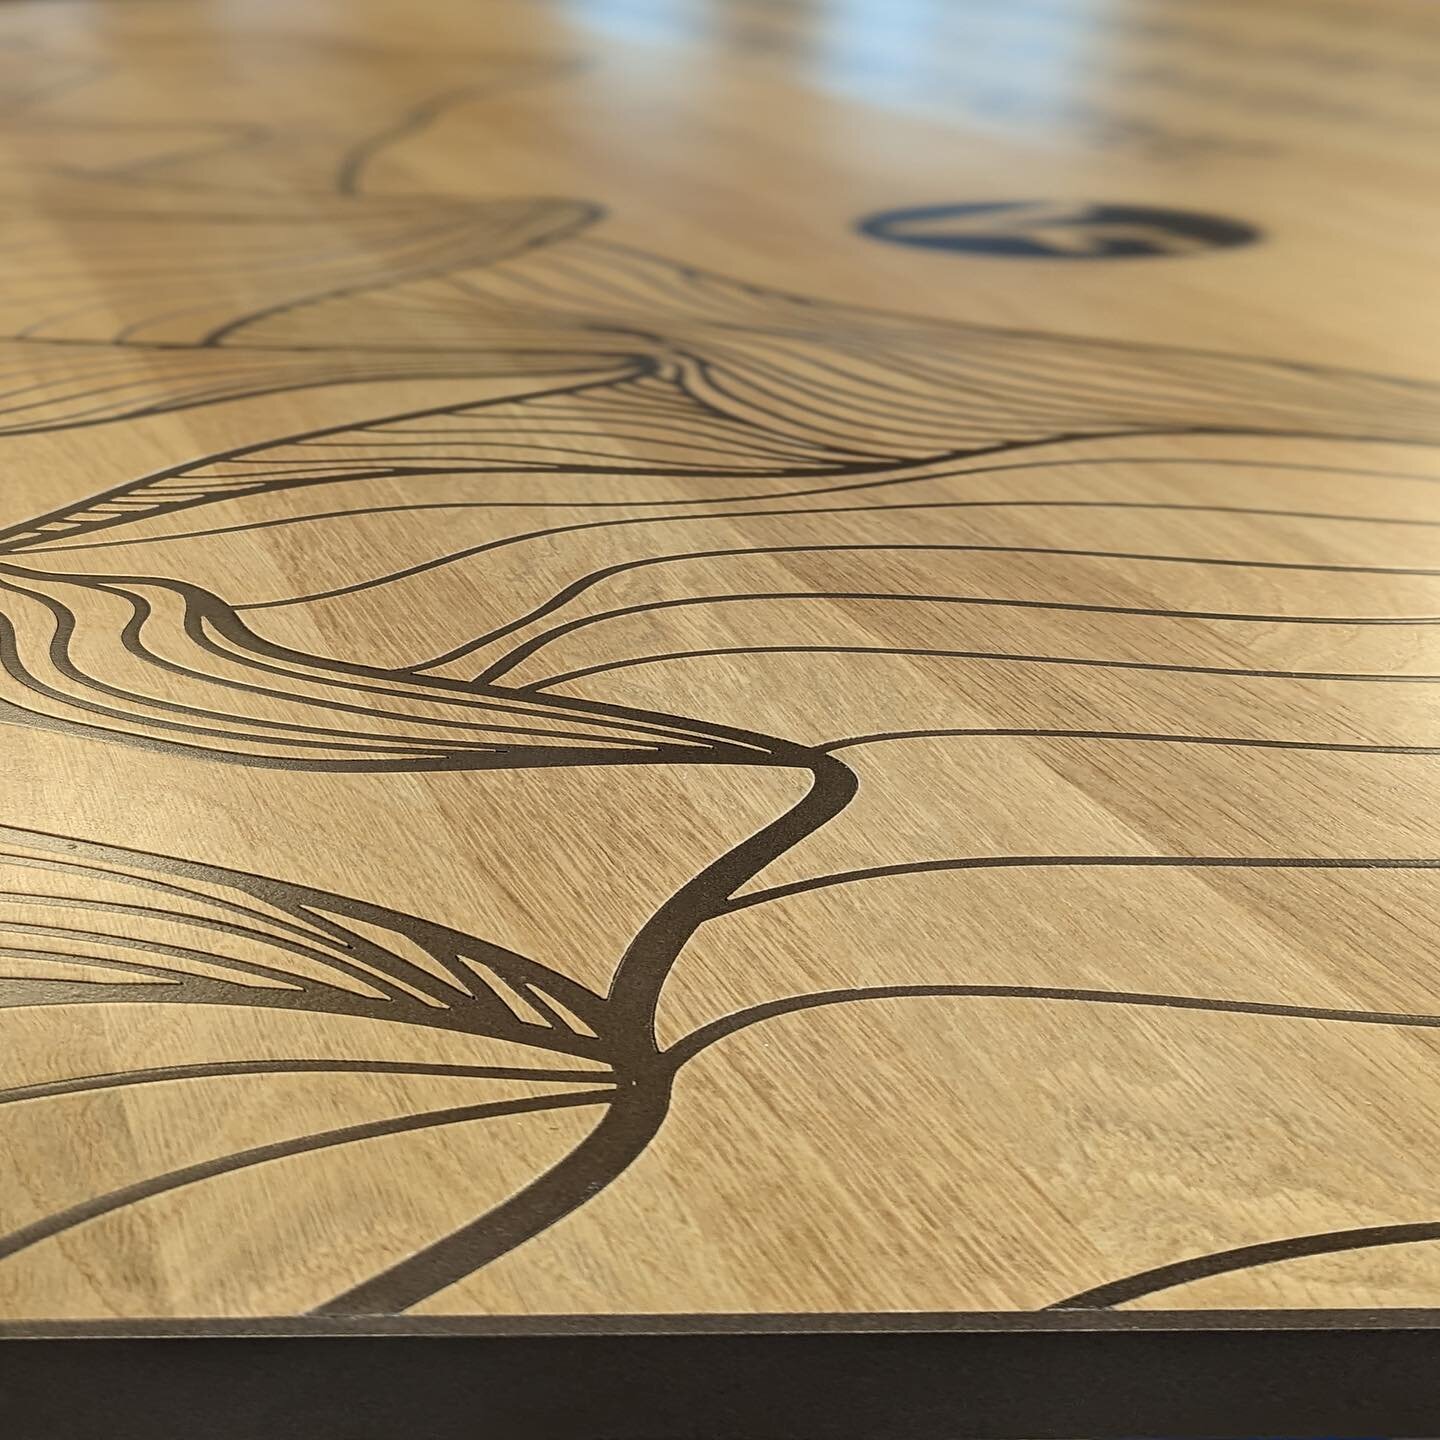 The devil is in the details. ⁠
The Make West shop recently turned out this very clean principle statement feature for VF Corp.'s Ontario, Ca office. The base material is a solid oak glue-up which was then routed and inlaid with a textured, powder-coa